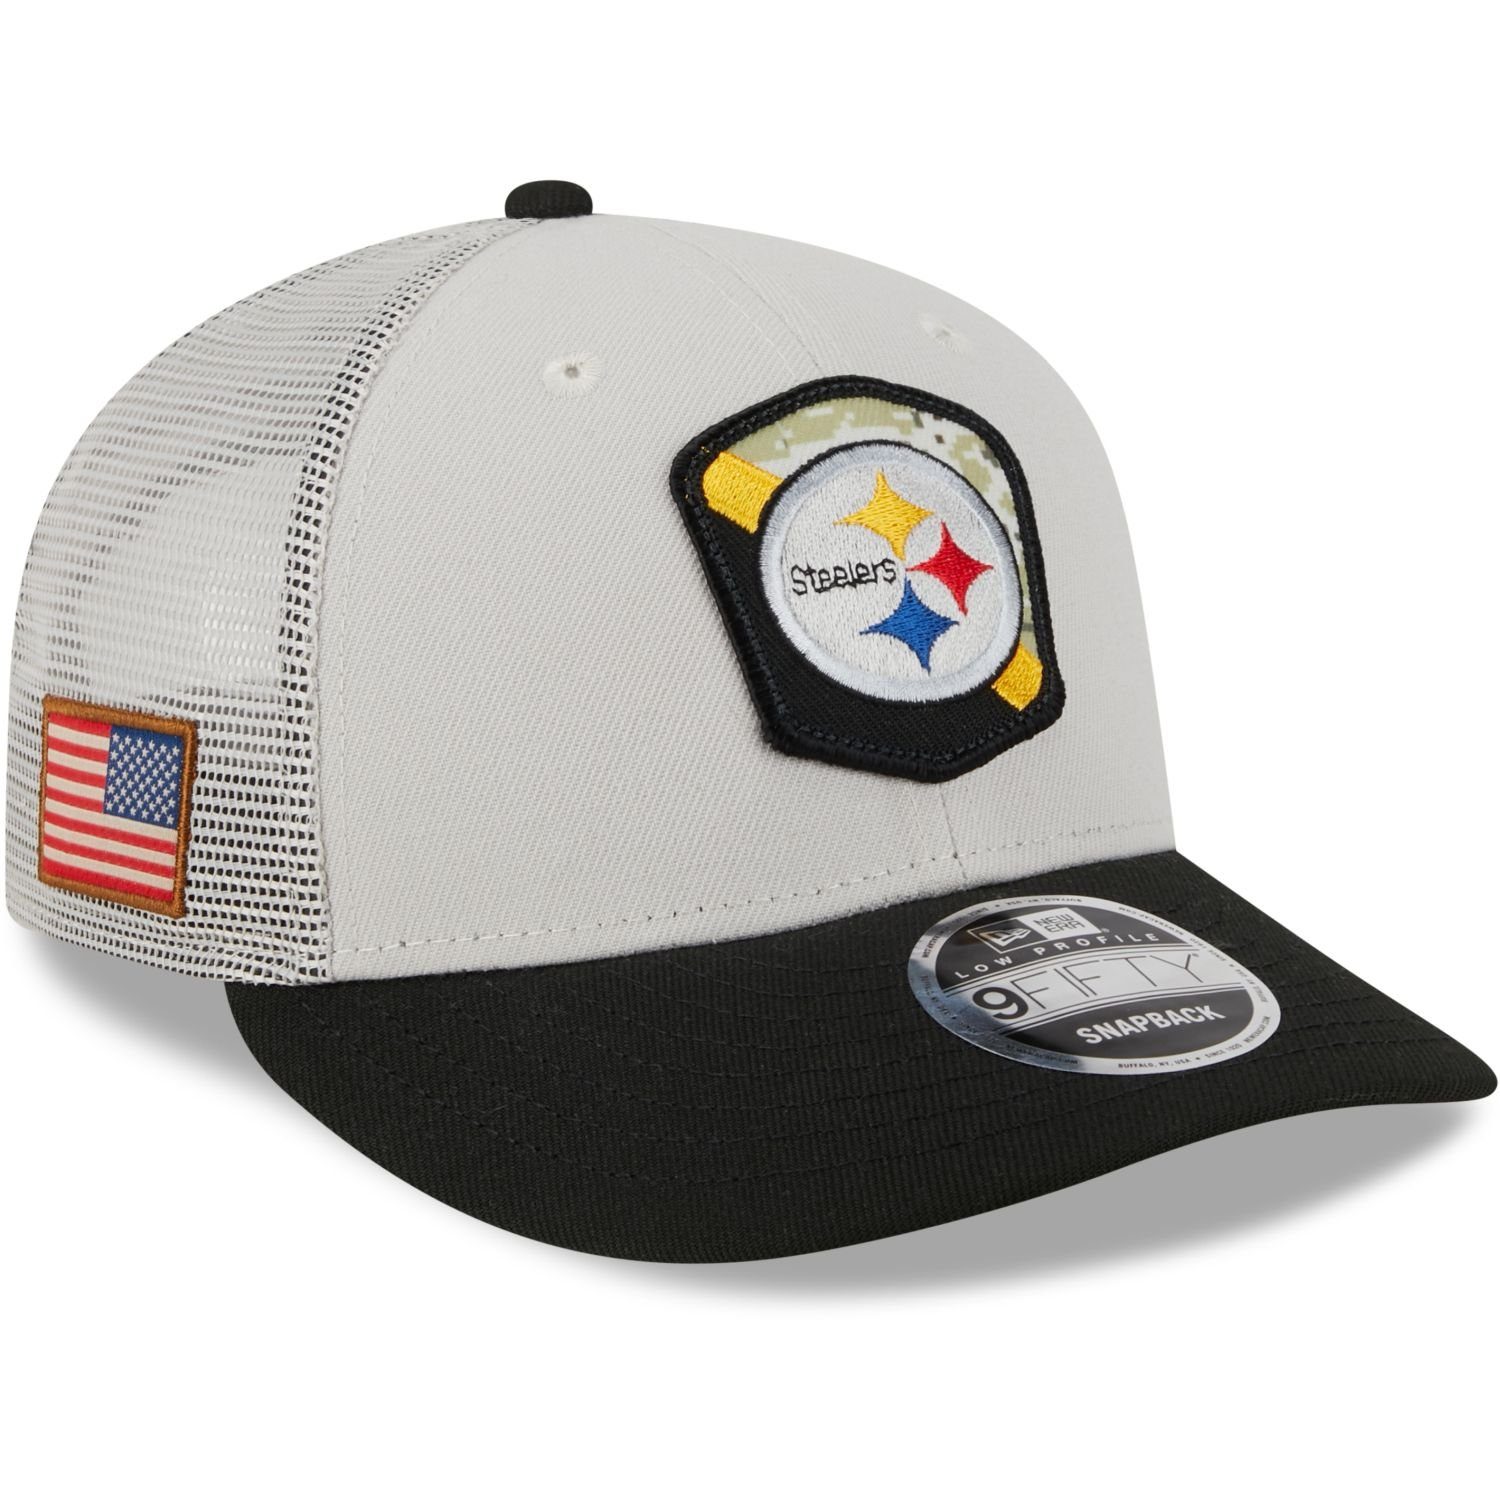 New Era Snapback Cap 9Fifty Low Profile Snap NFL Salute to Service Pittsburgh Steelers